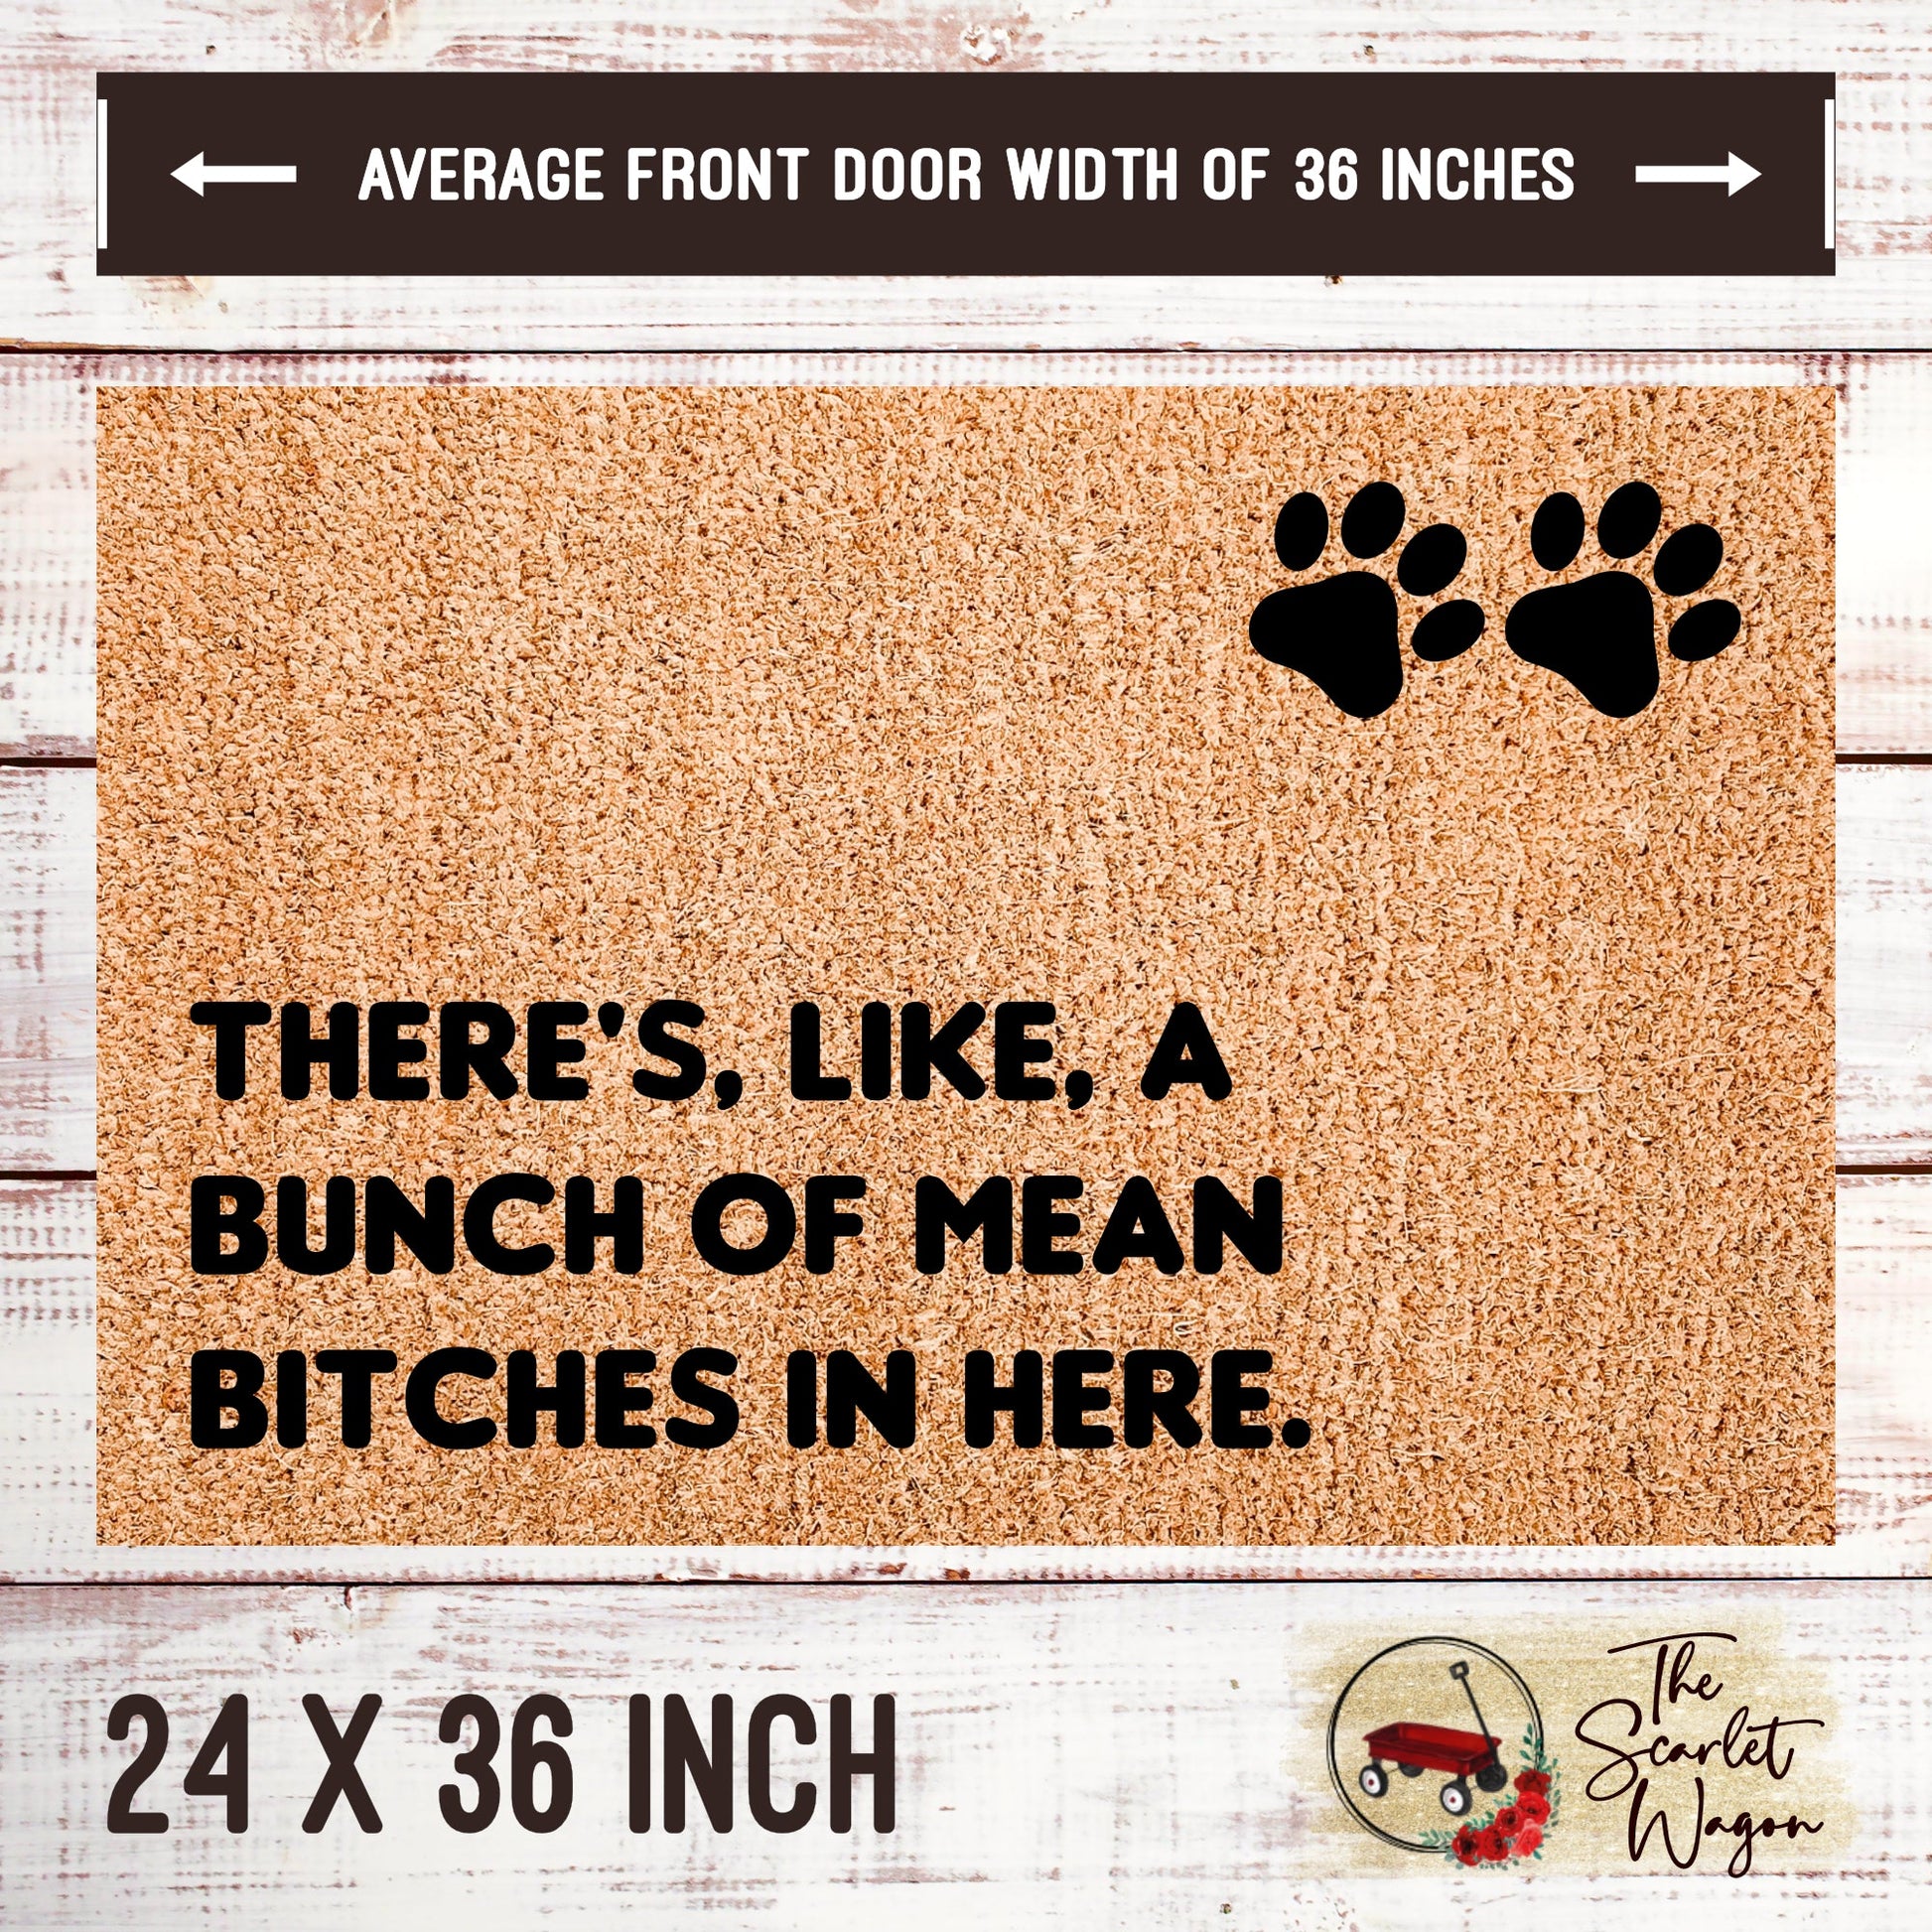 Bunch of Mean Bitches in Here Door Mats teelaunch 24x36 Inches (Free Shipping) 